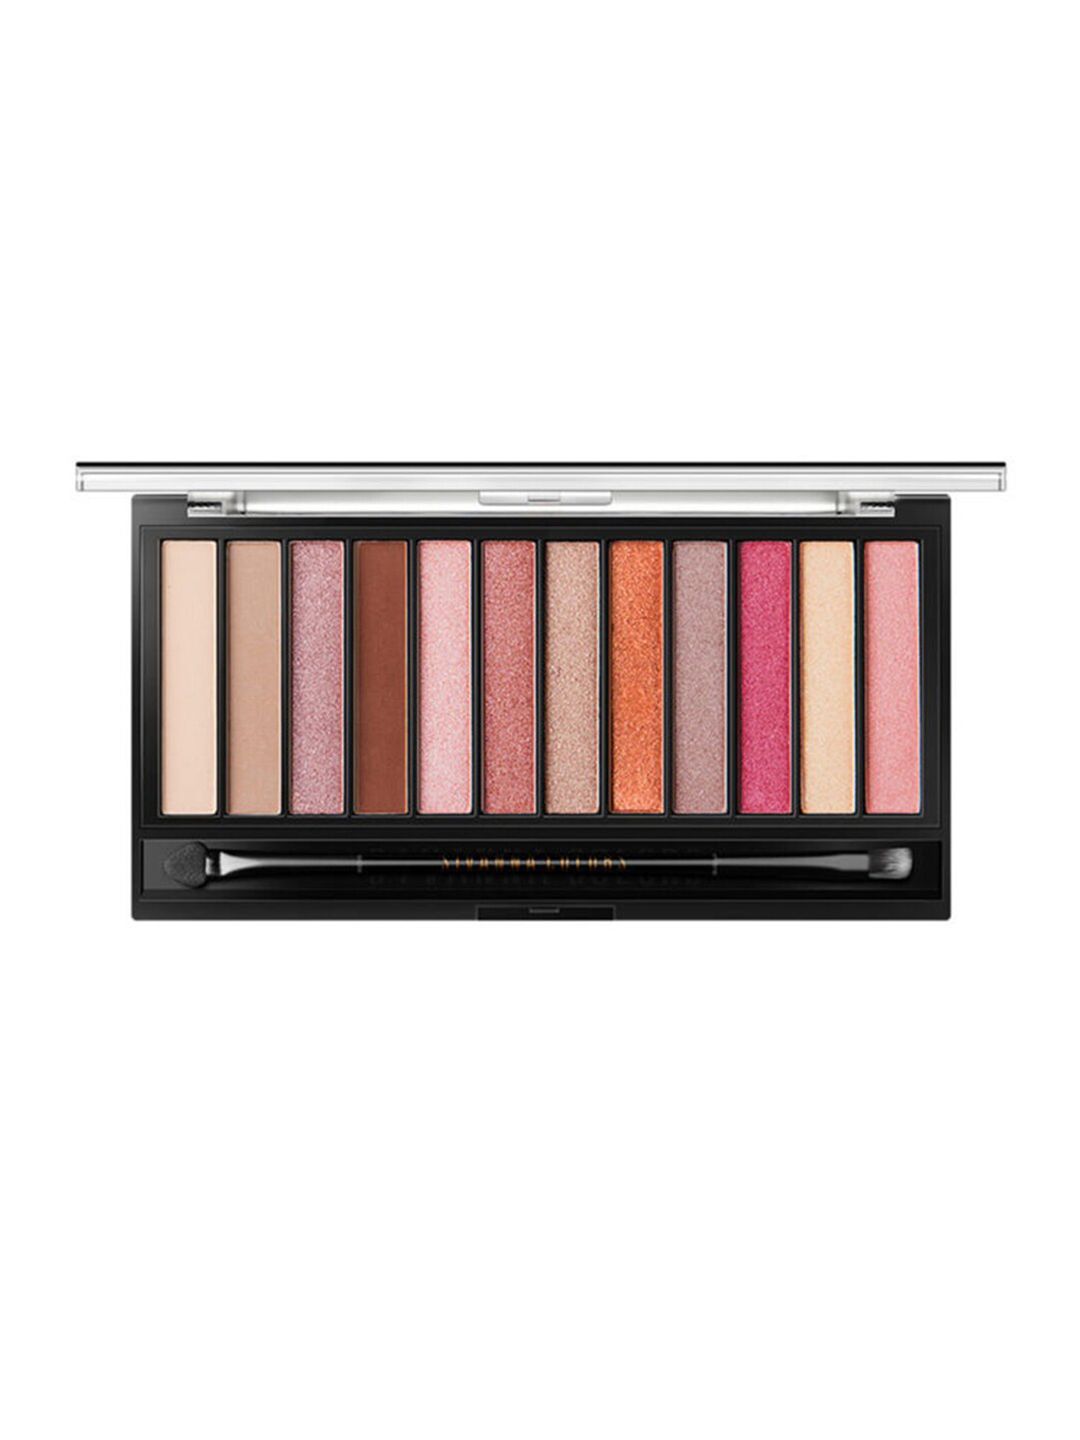 Sivanna Colors Make Up Studio Deluxe Eyeshadow Palette - HF202 02 Price in India